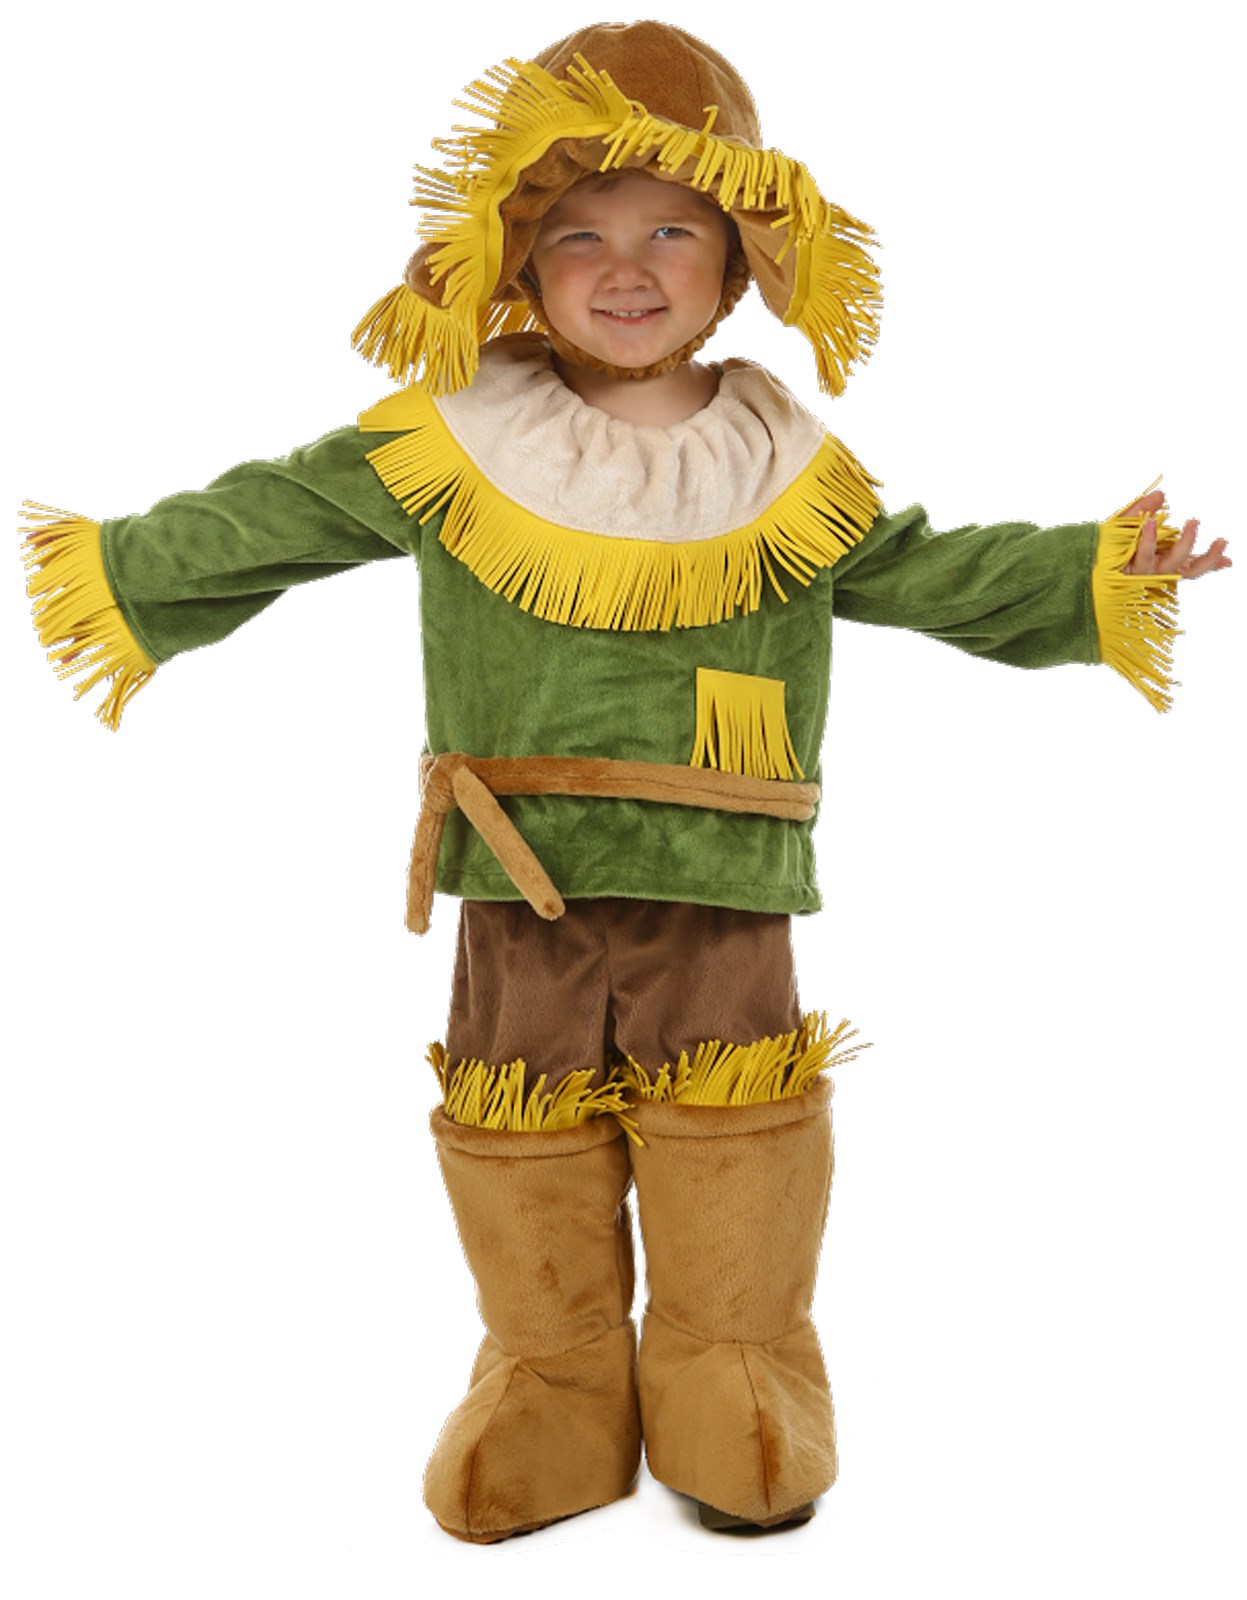 The Wizard of Oz Scarecrow Costume for Infants